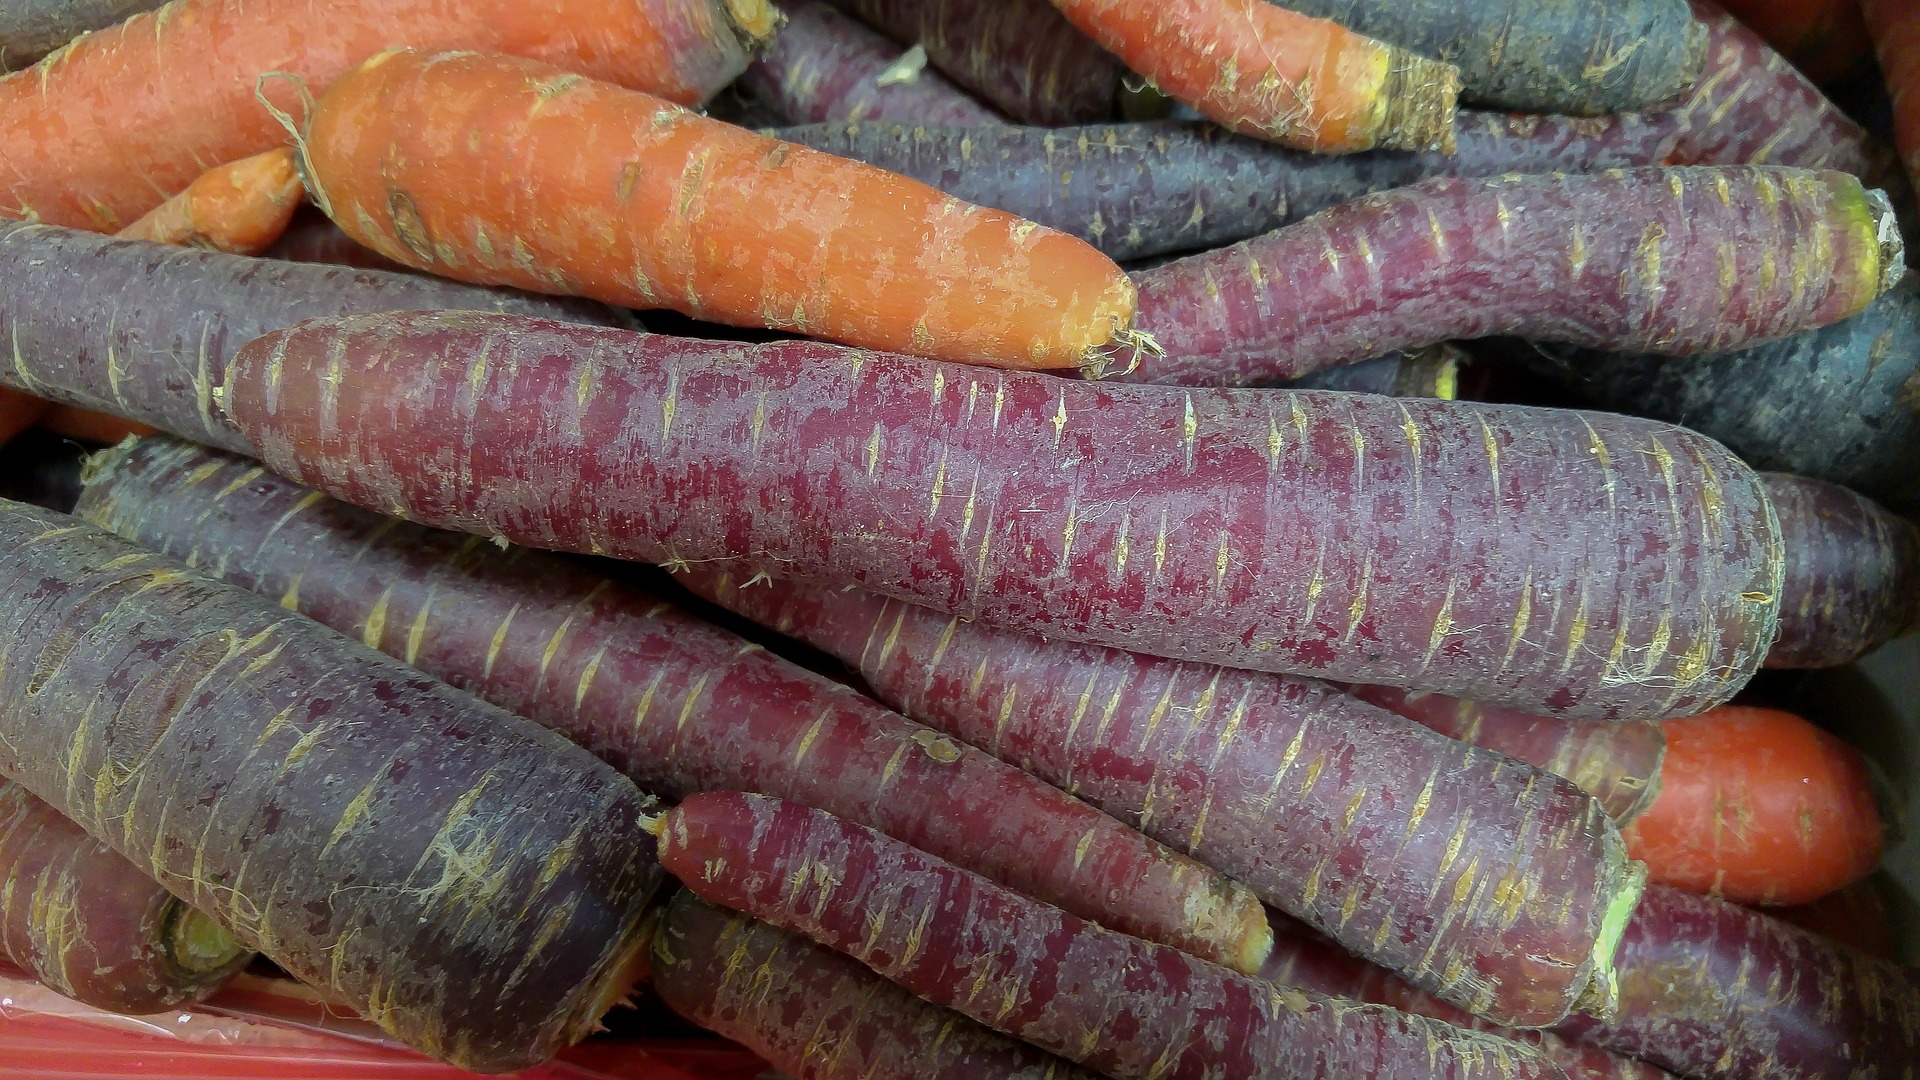 Carrots of different colors.